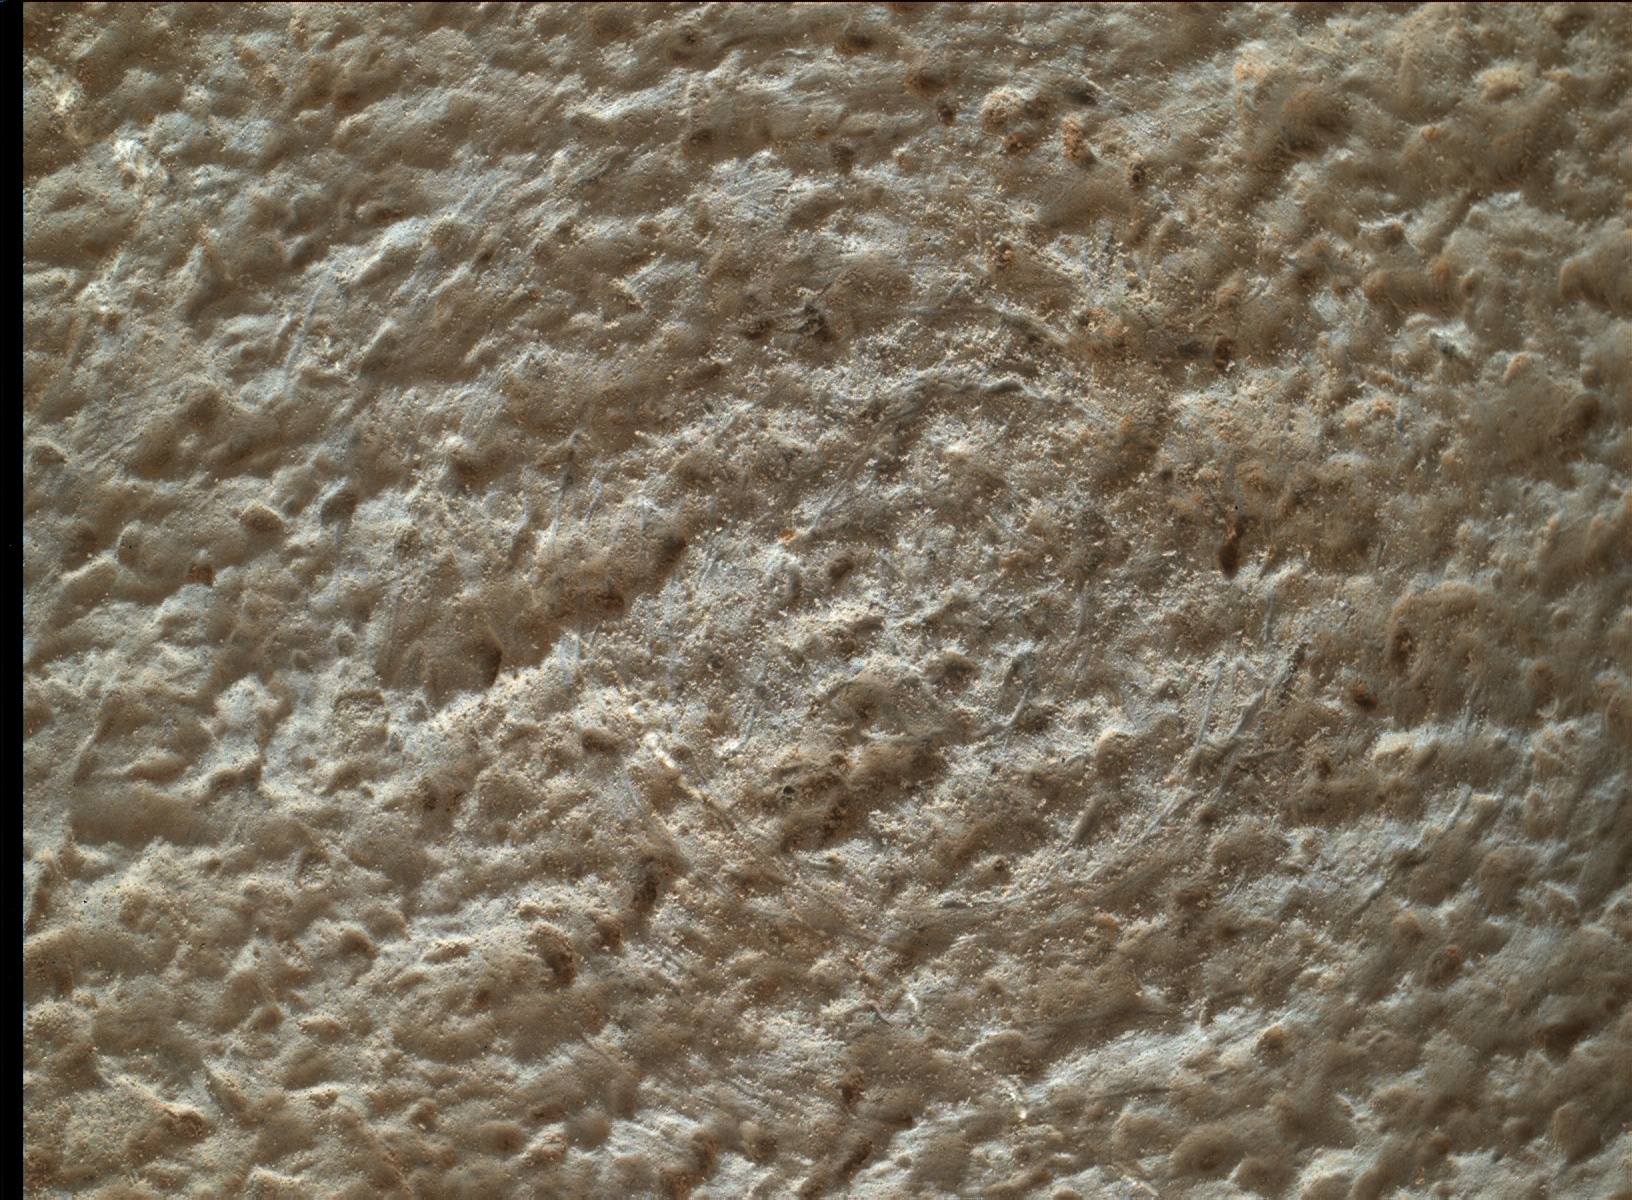 Nasa's Mars rover Curiosity acquired this image using its Mars Hand Lens Imager (MAHLI) on Sol 819